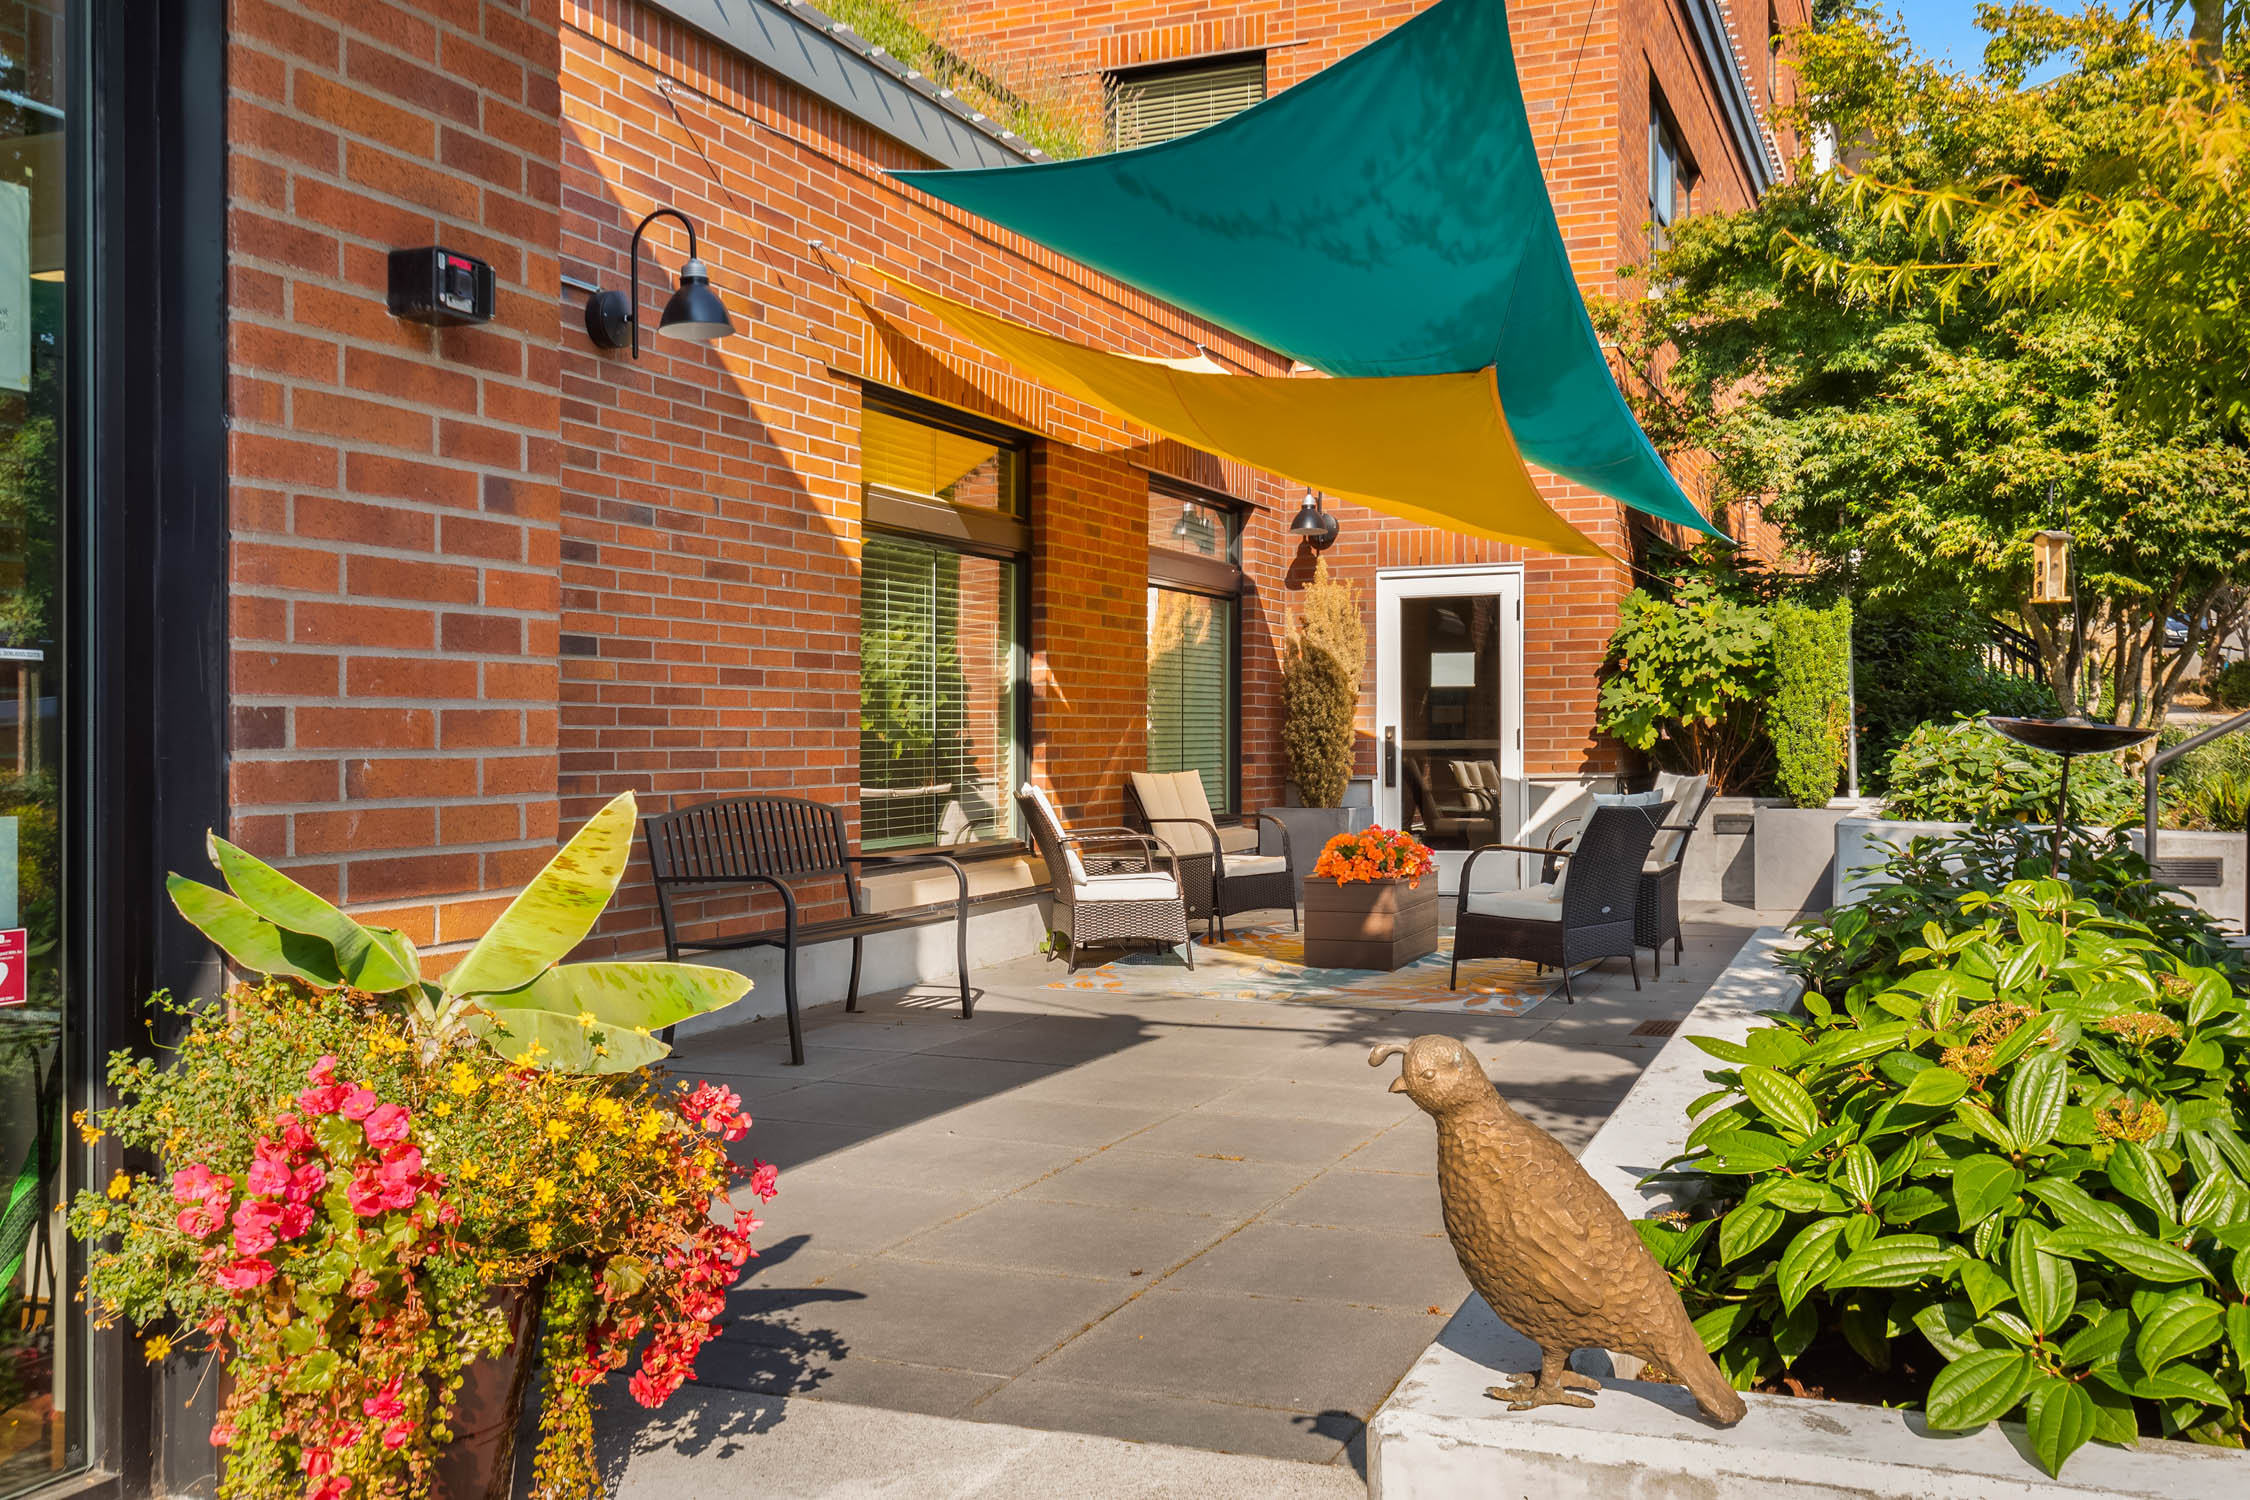 Enjoy a Common Area with Garden Beside at Quail Park Memory Care Residences of West Seattle Independent Living Facility